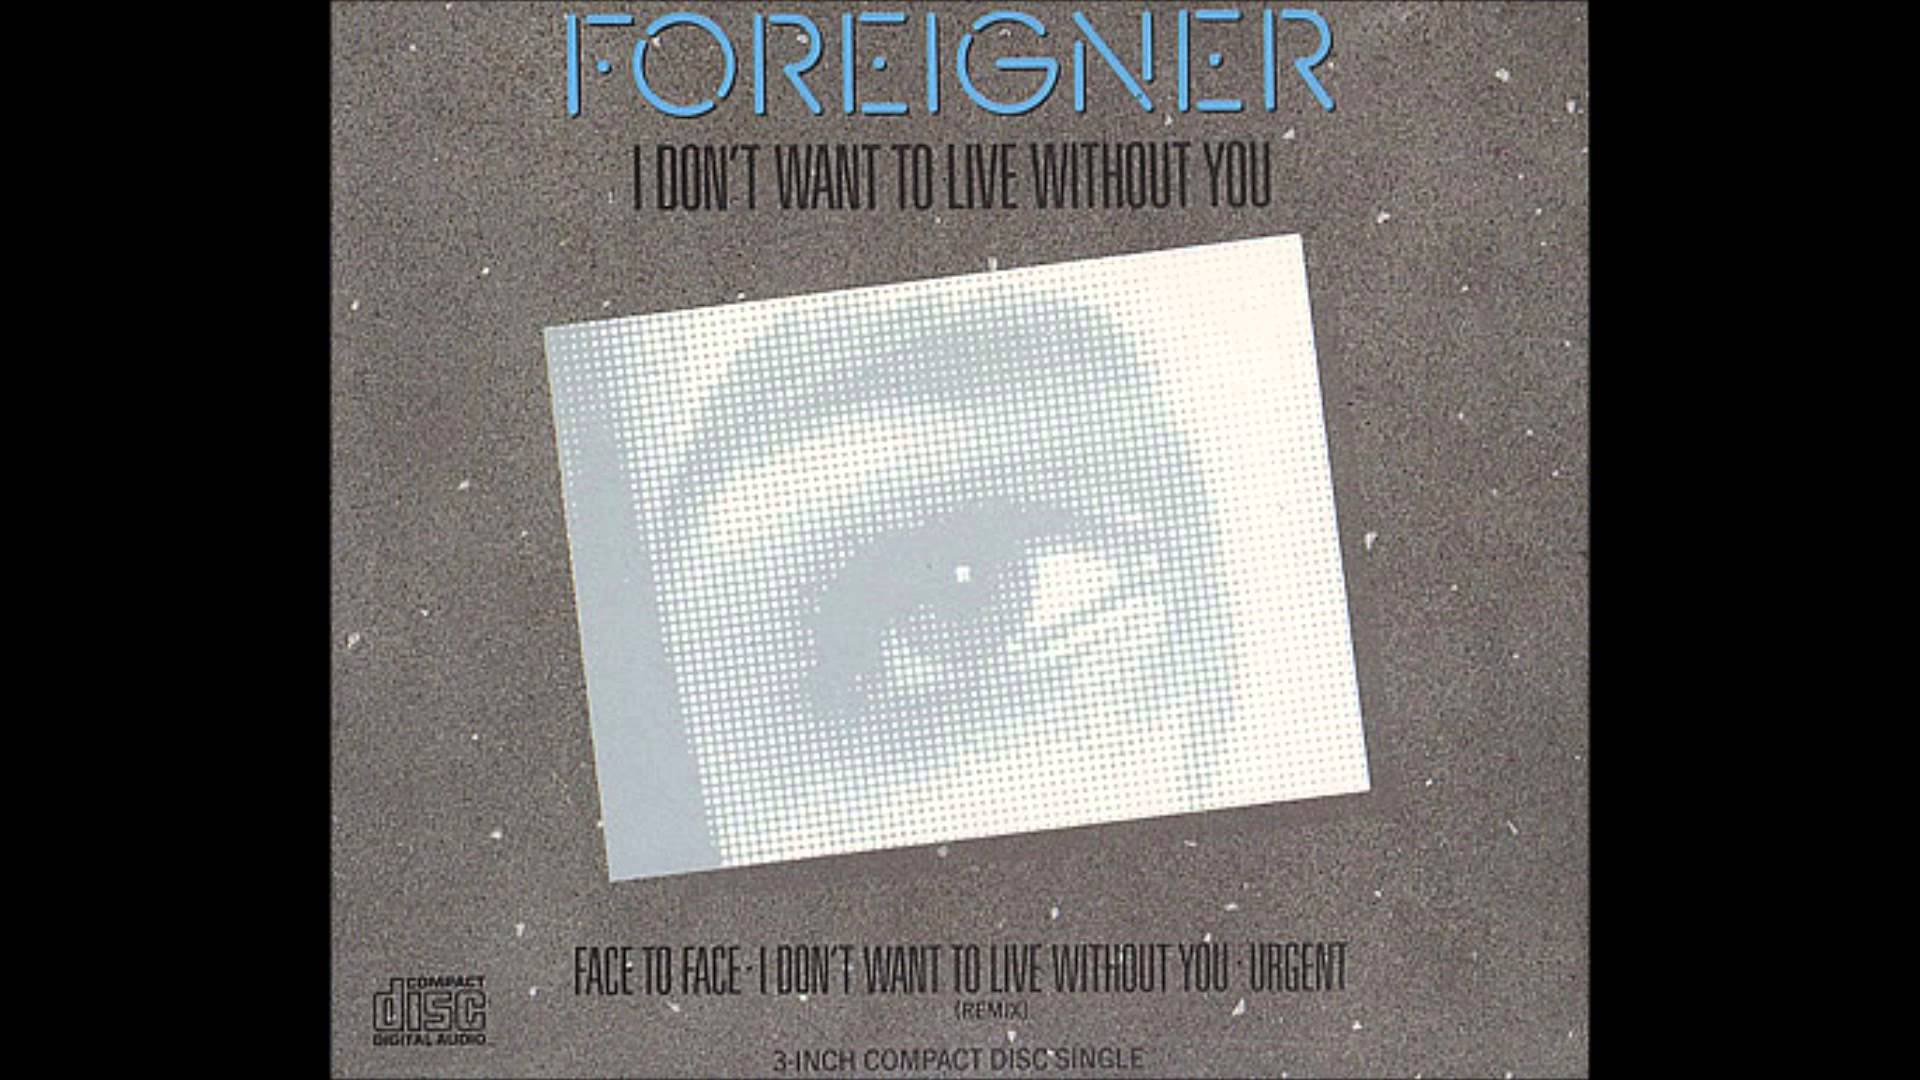 Foreigner: I Don't Want to Live Without You